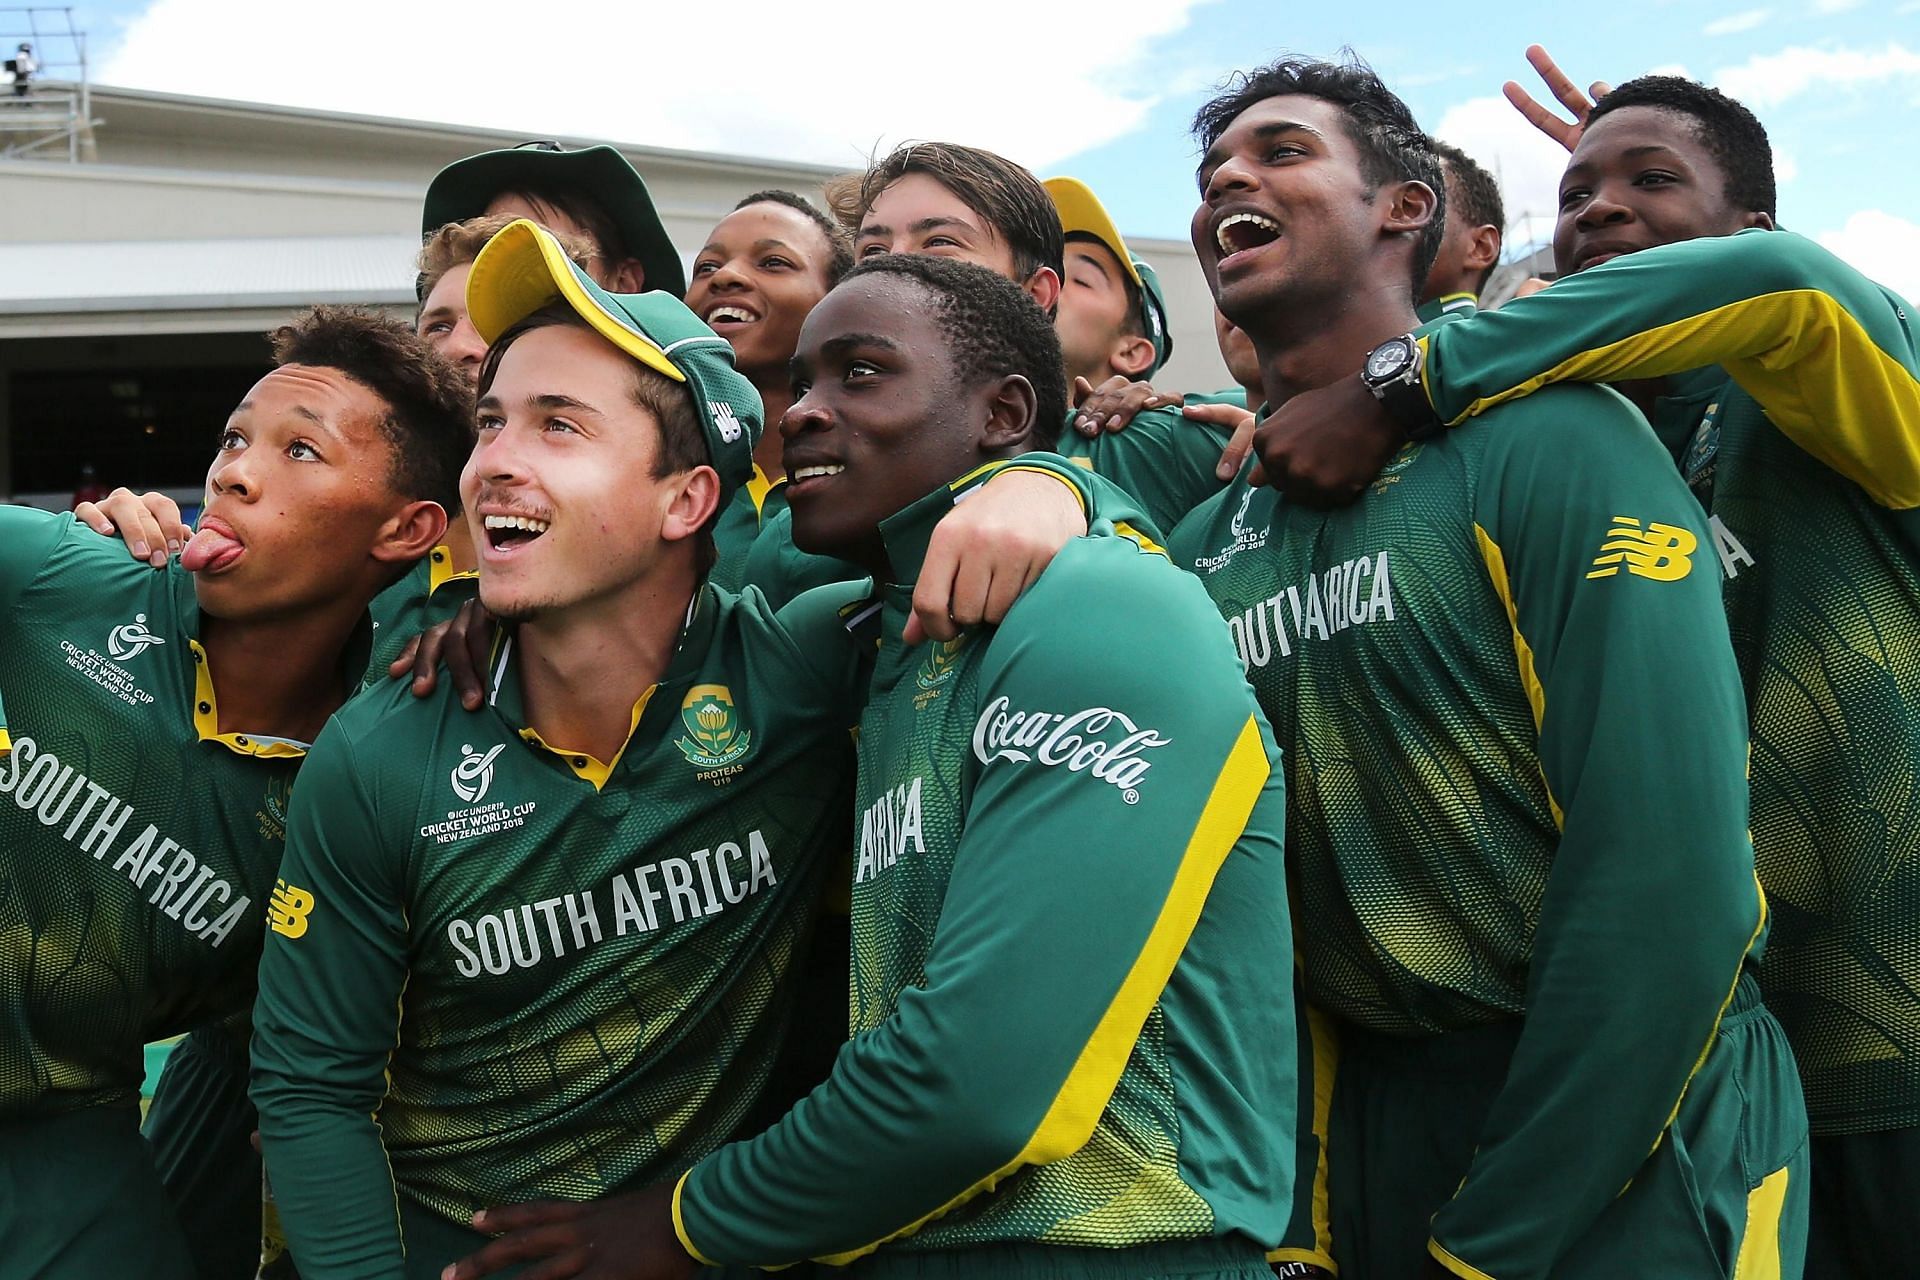 South Africa will take on Uganda in the U19 World Cup 2022.